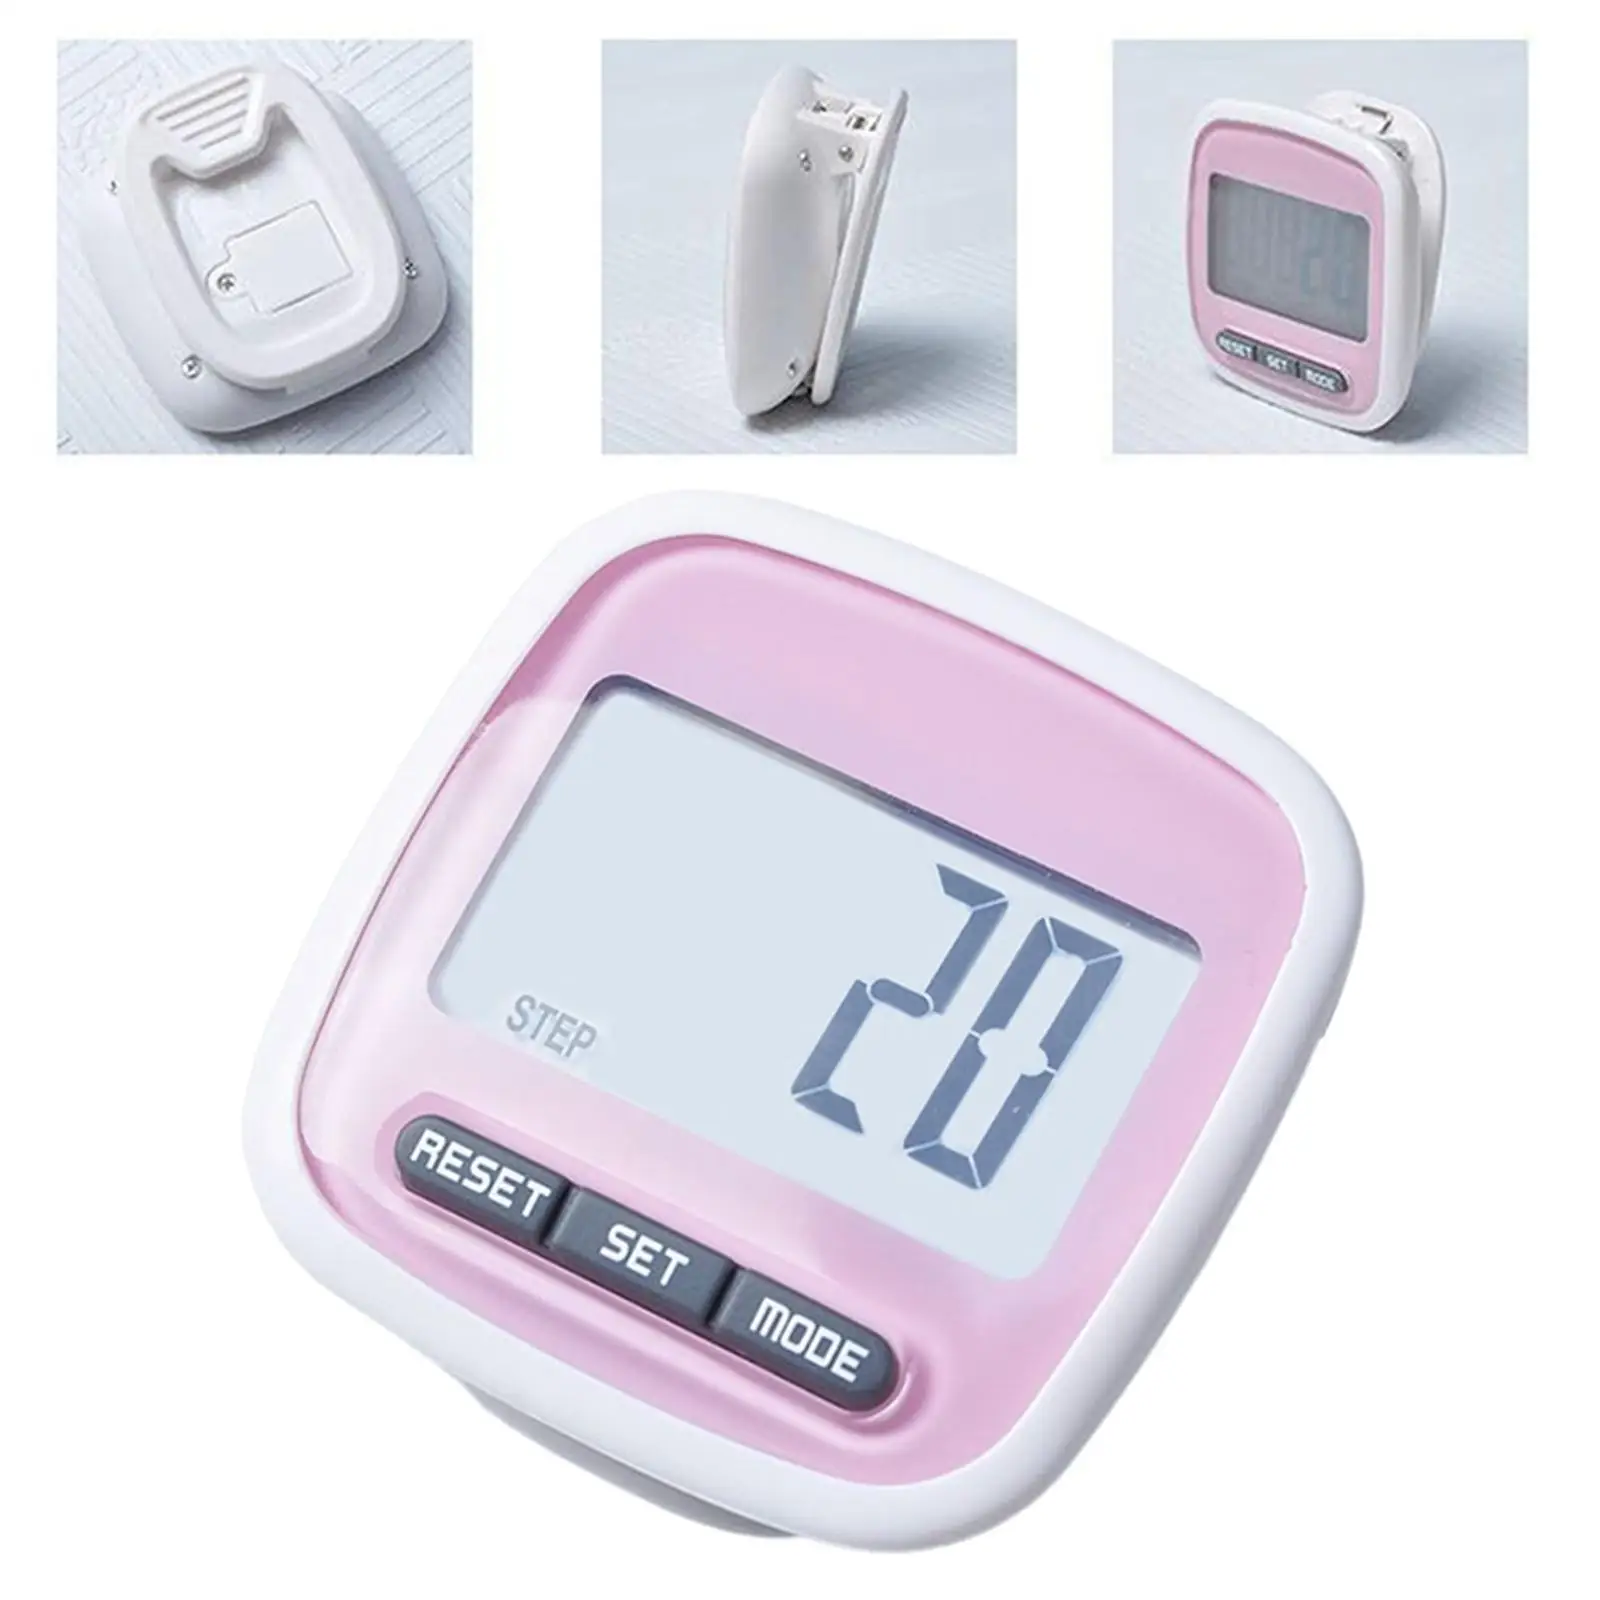 Portable Step Counters Walk Fitness Calorie Distance Counting Daily Target Monitor Step Counters for Walking Climbing